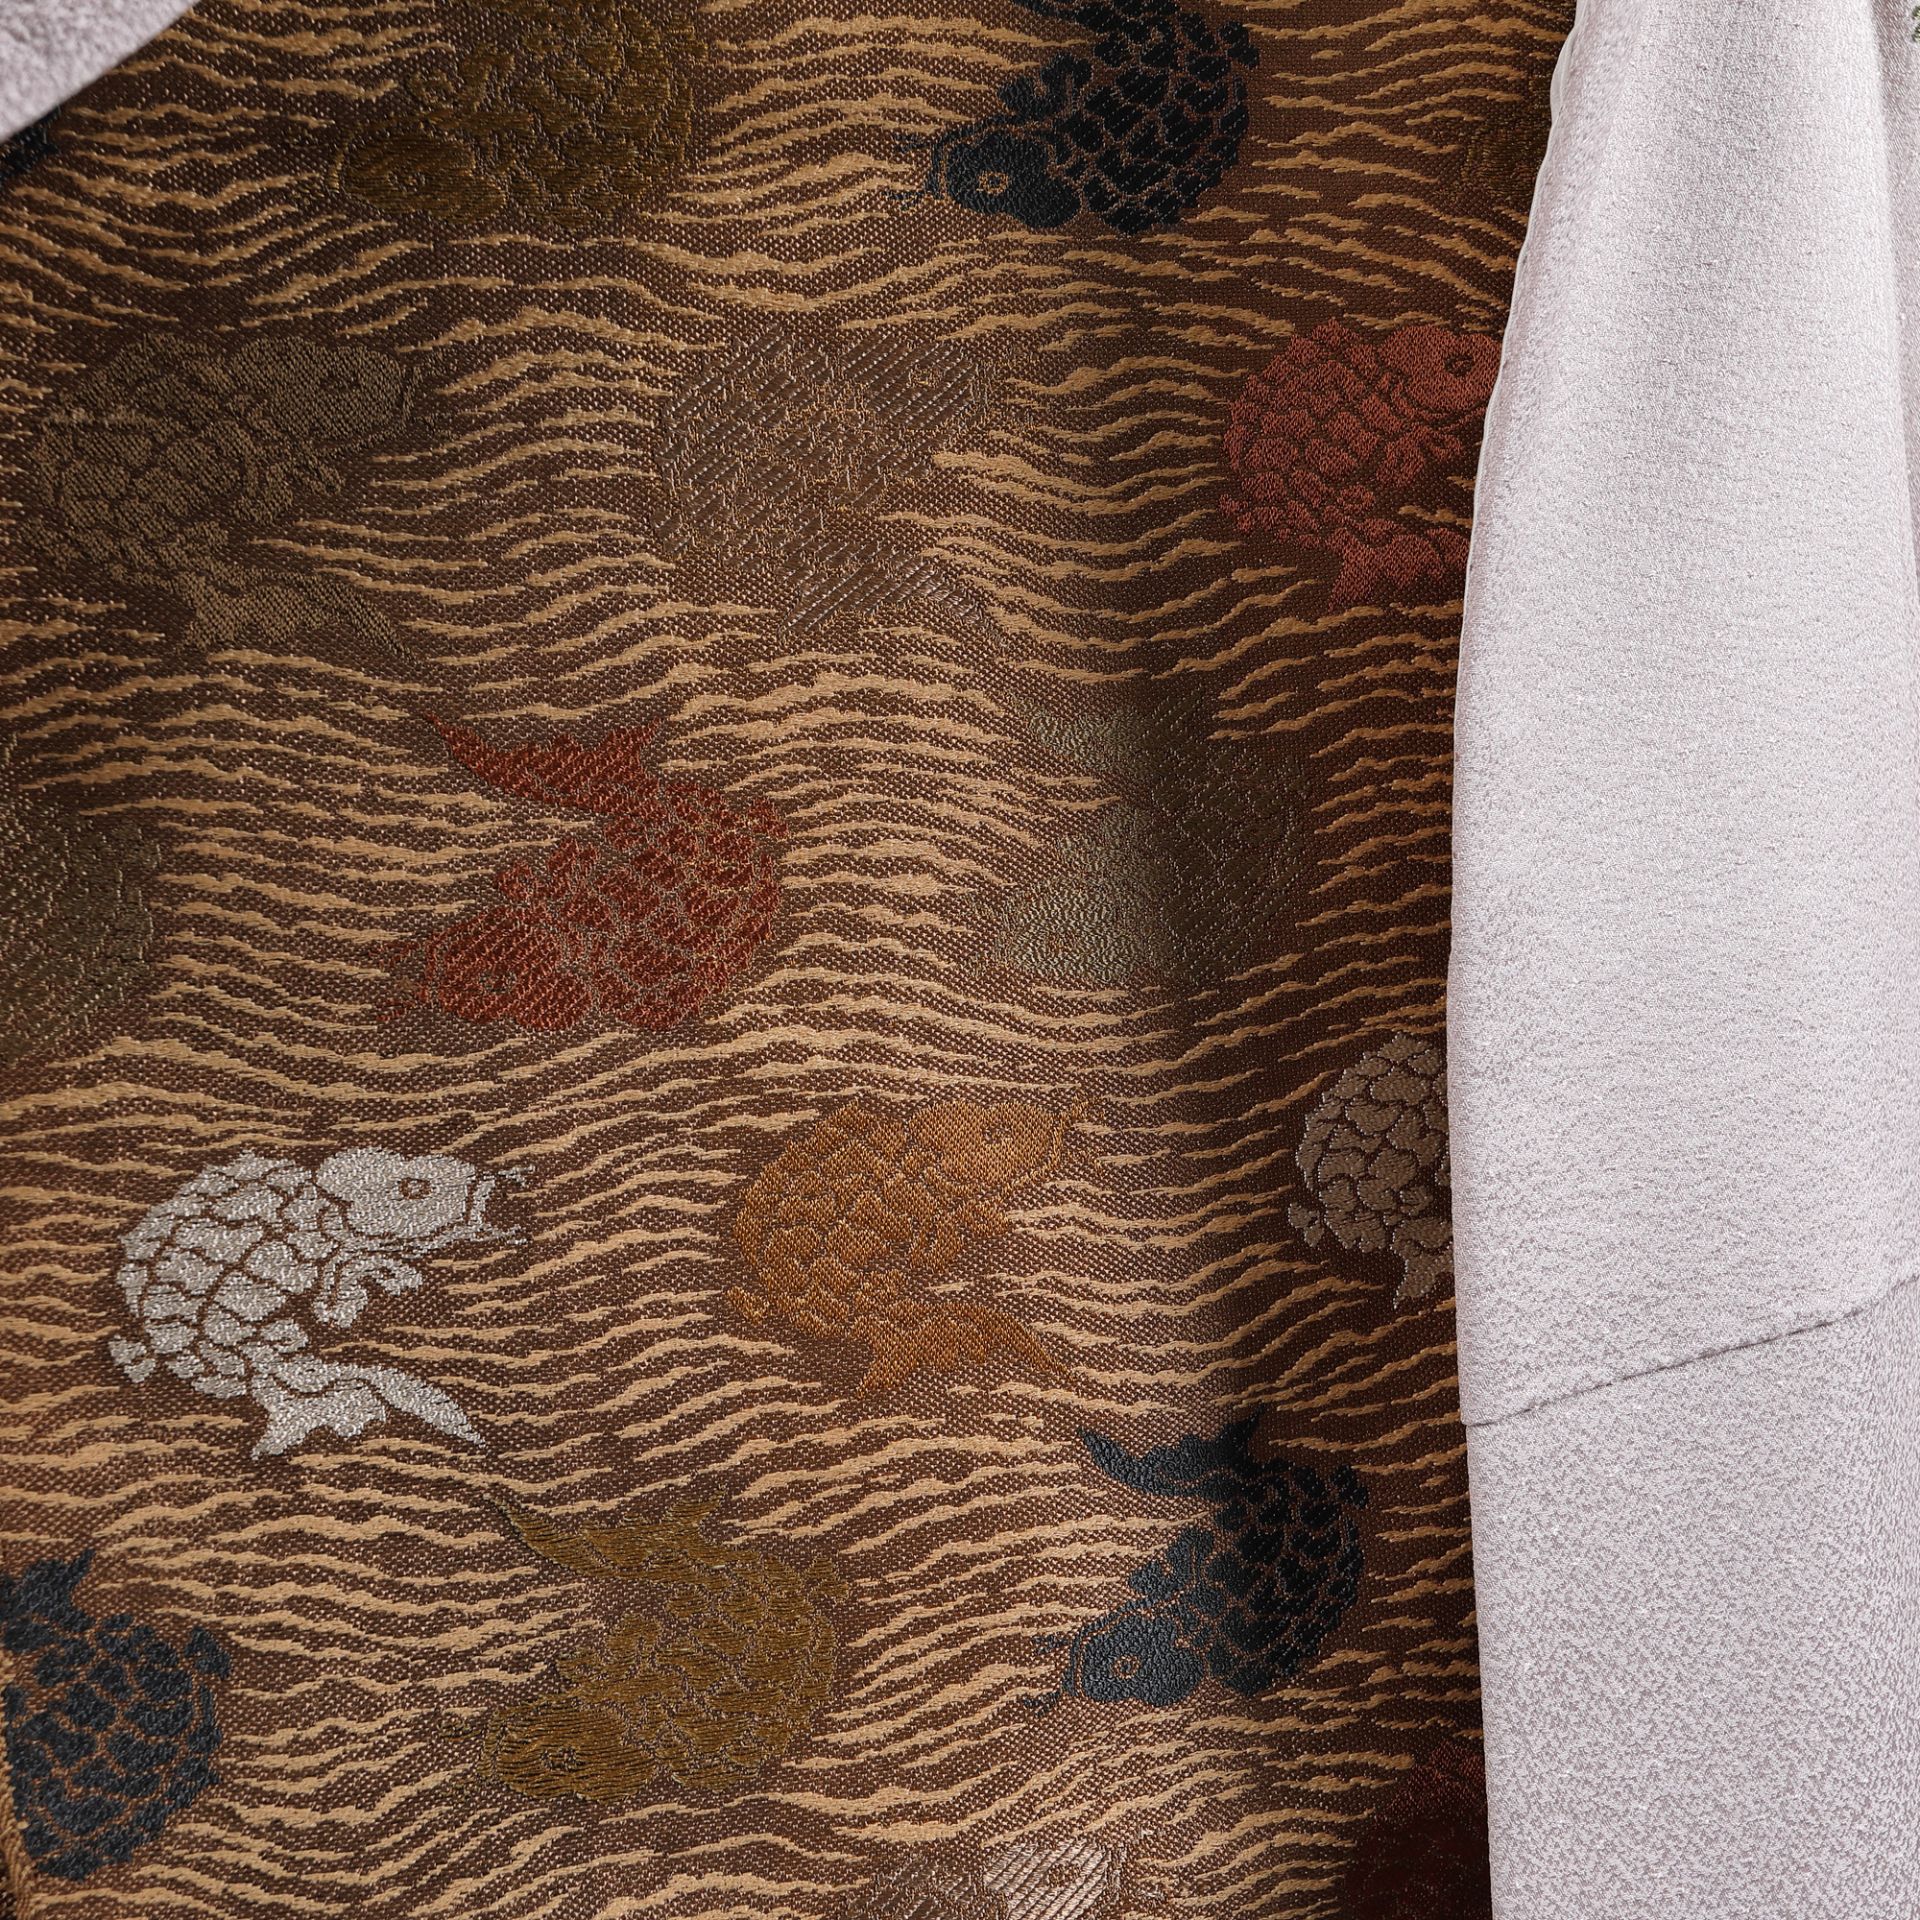 Tsukesage (formal kimono) made of silk, embroidered by hand using silk and silver thread, obi decora - Image 3 of 4